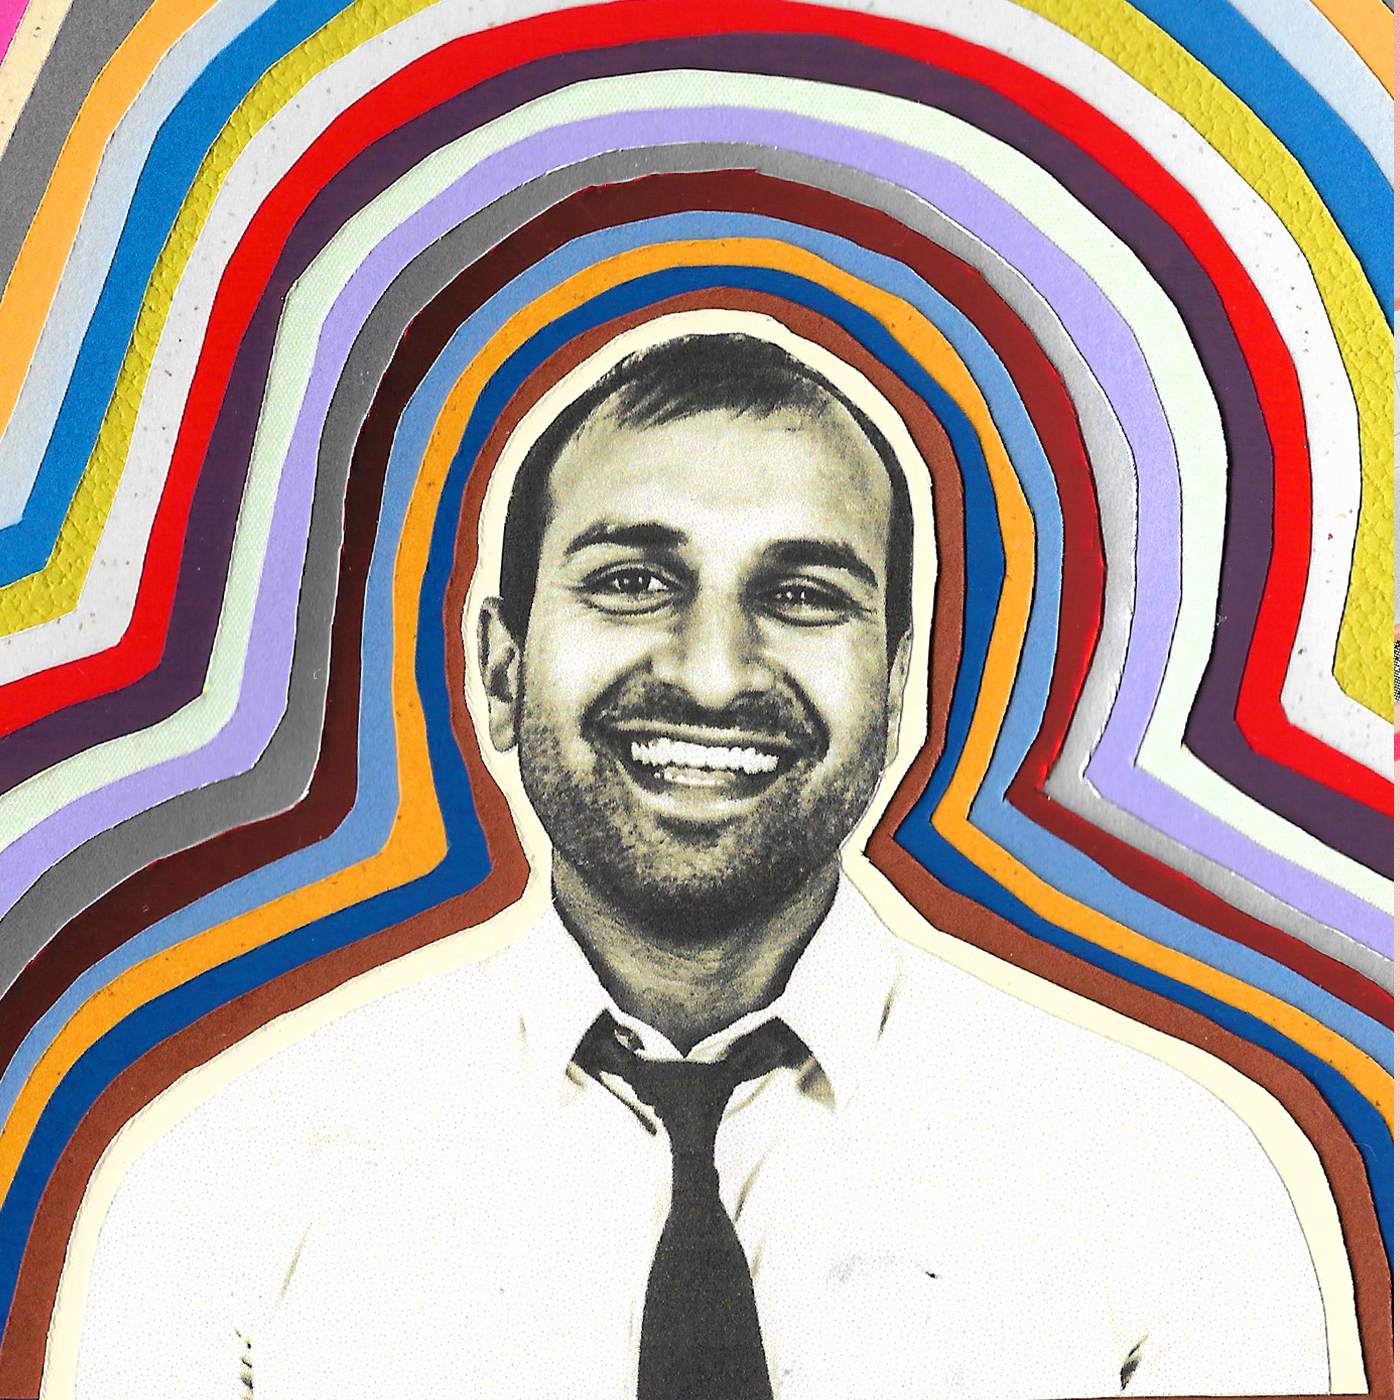 Sujan Patel, growth marketer and co-founder of Web Profits